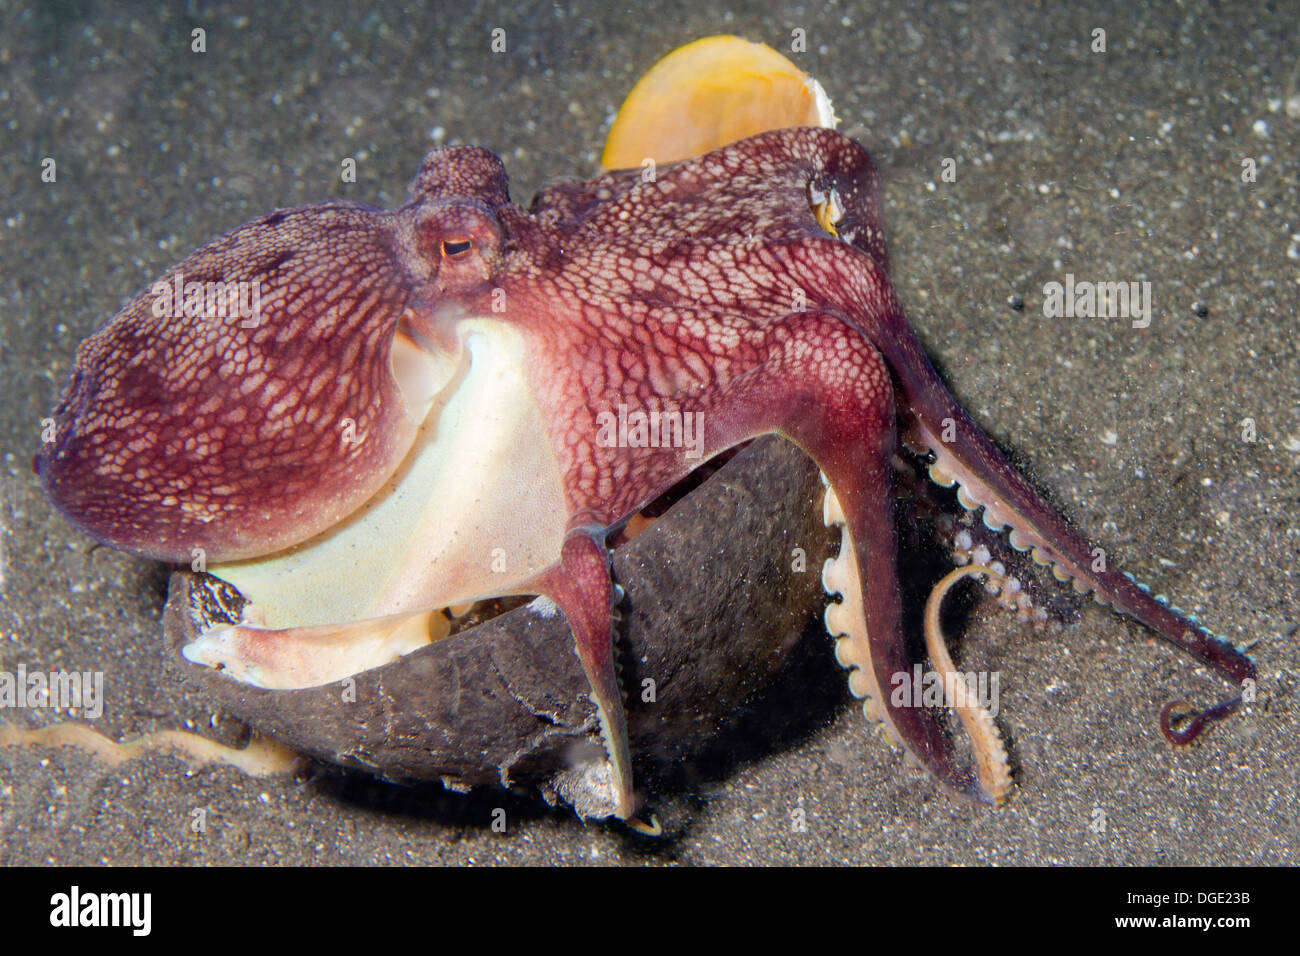 COconut Octopus carries around an empty coconot shell to use as armor.(Amphioctopus marginatus).Lembeh Straits,Indonesia Stock Photo